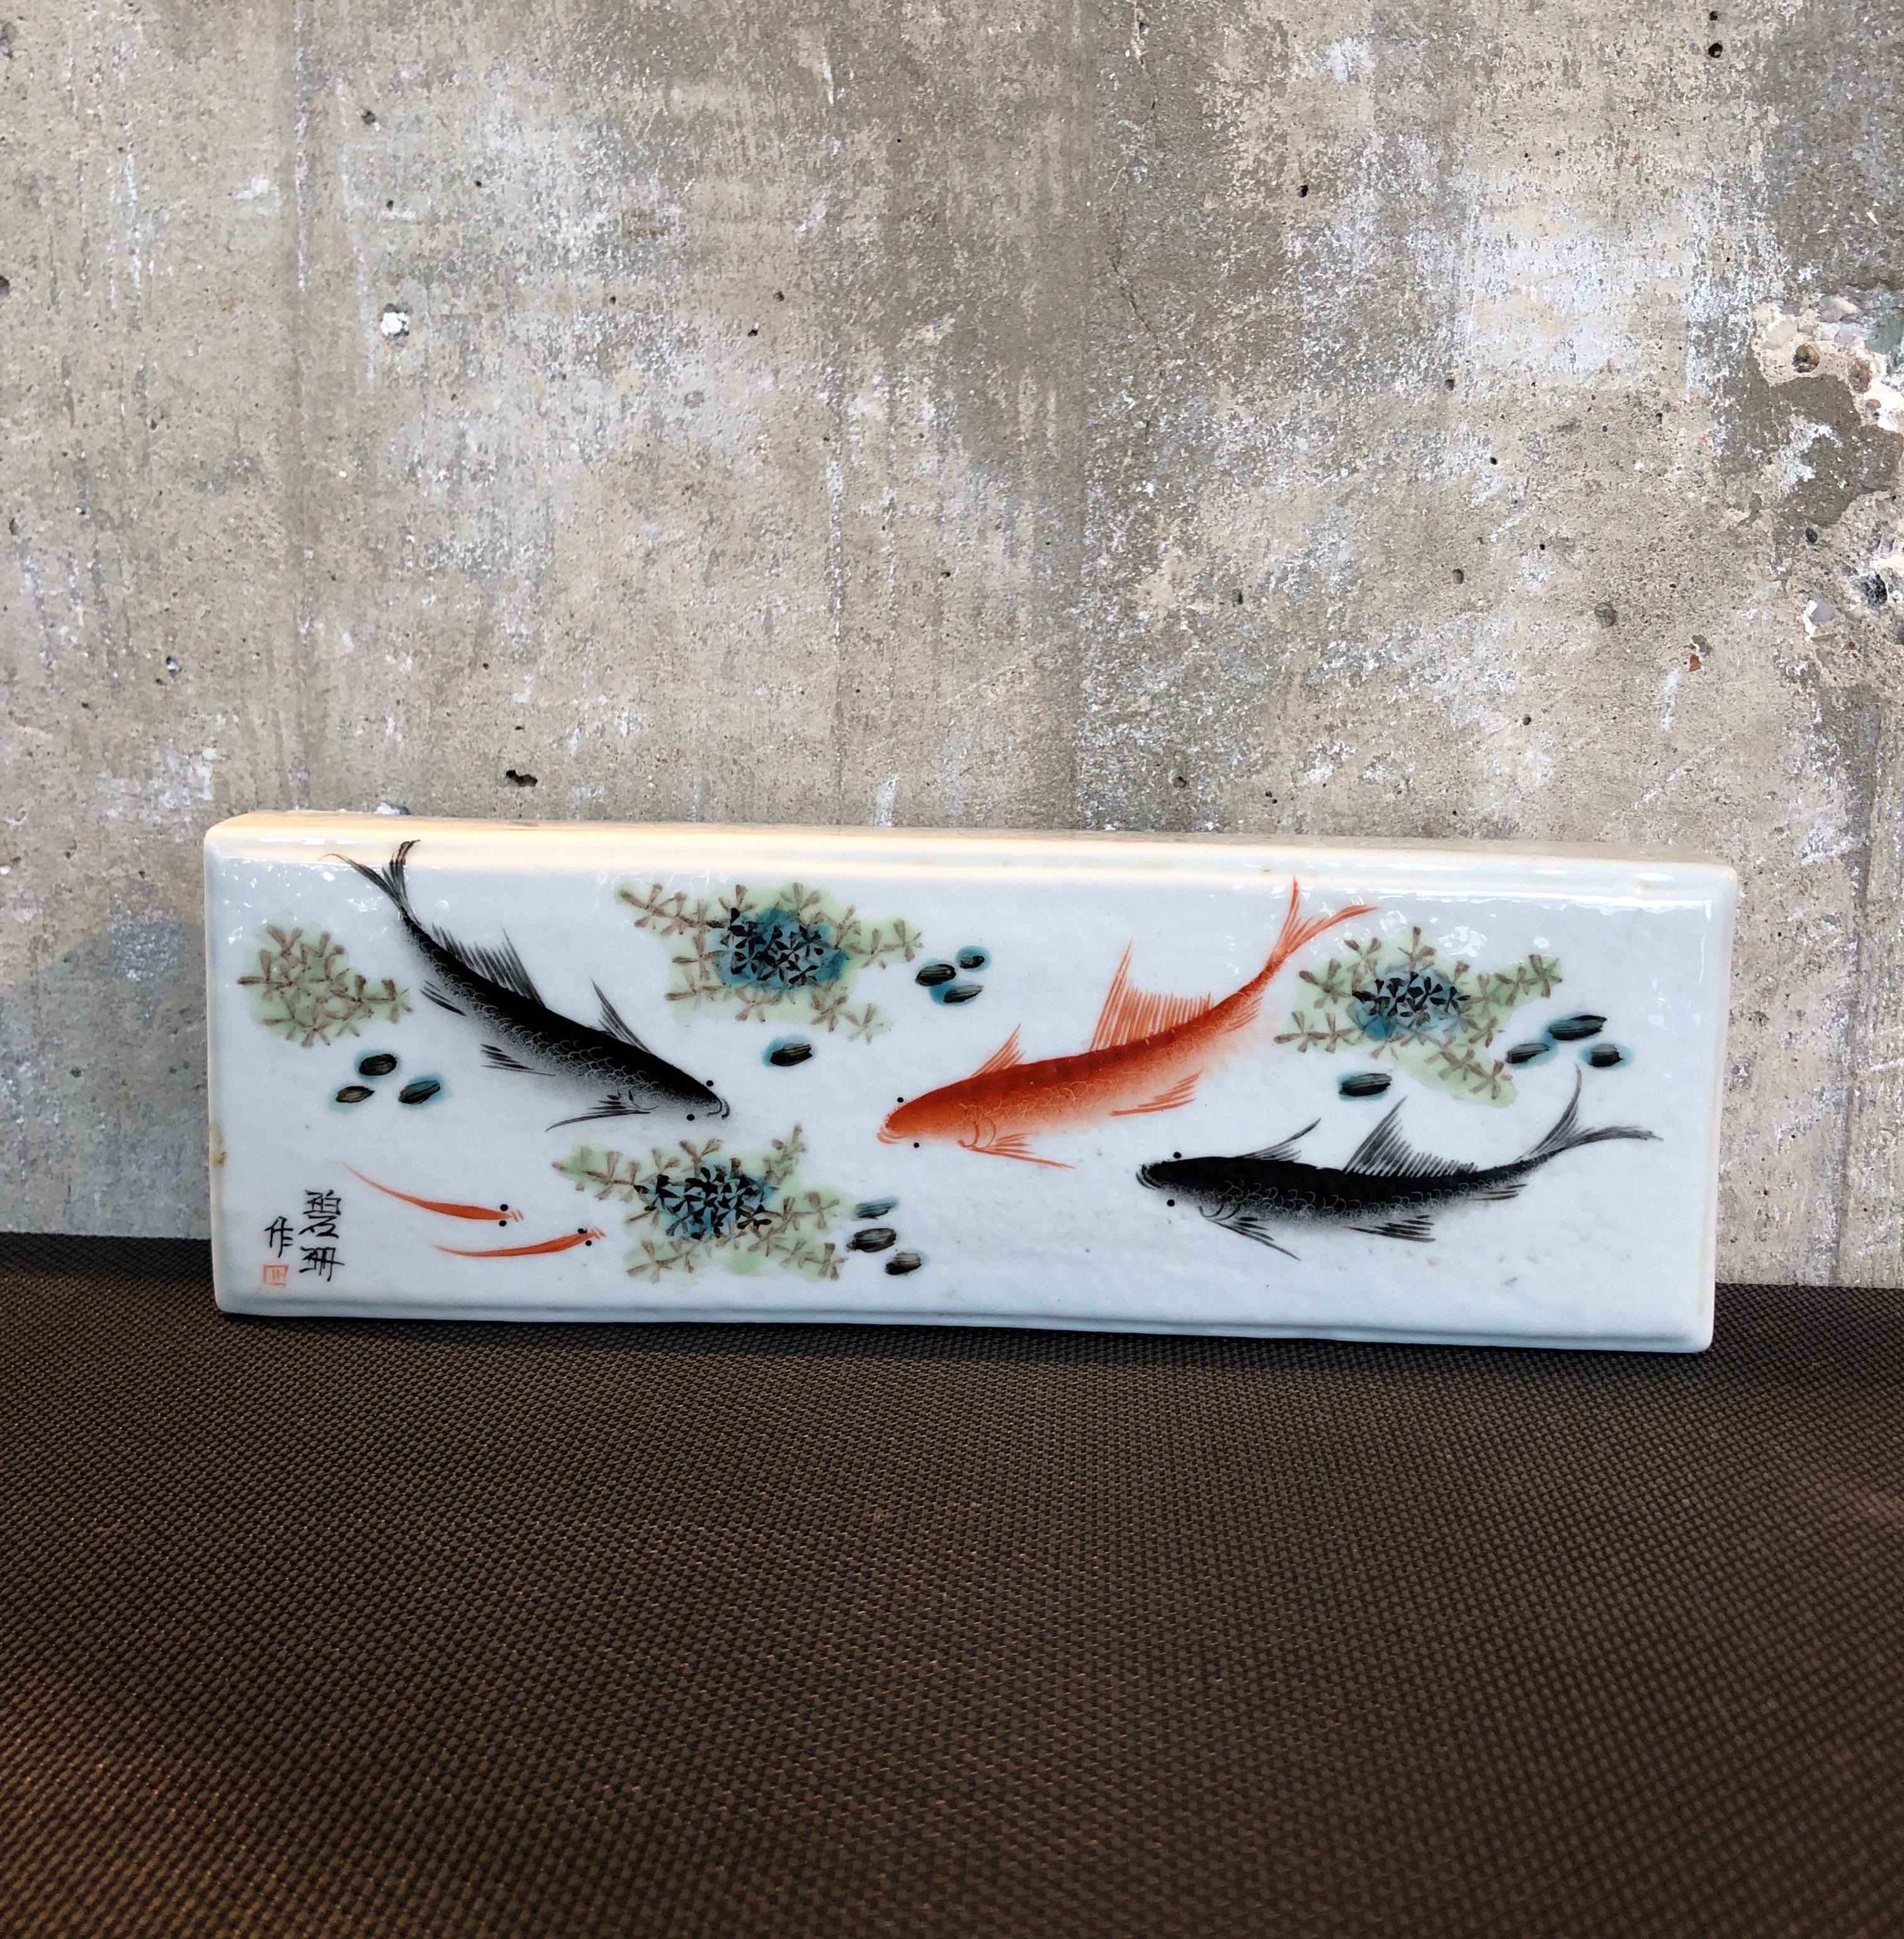 A heavy mid-century Chinese porcelain brush rest, beautifully hand painted with colorful fish images and character marks on the lower left corner. An unusual and striking piece.